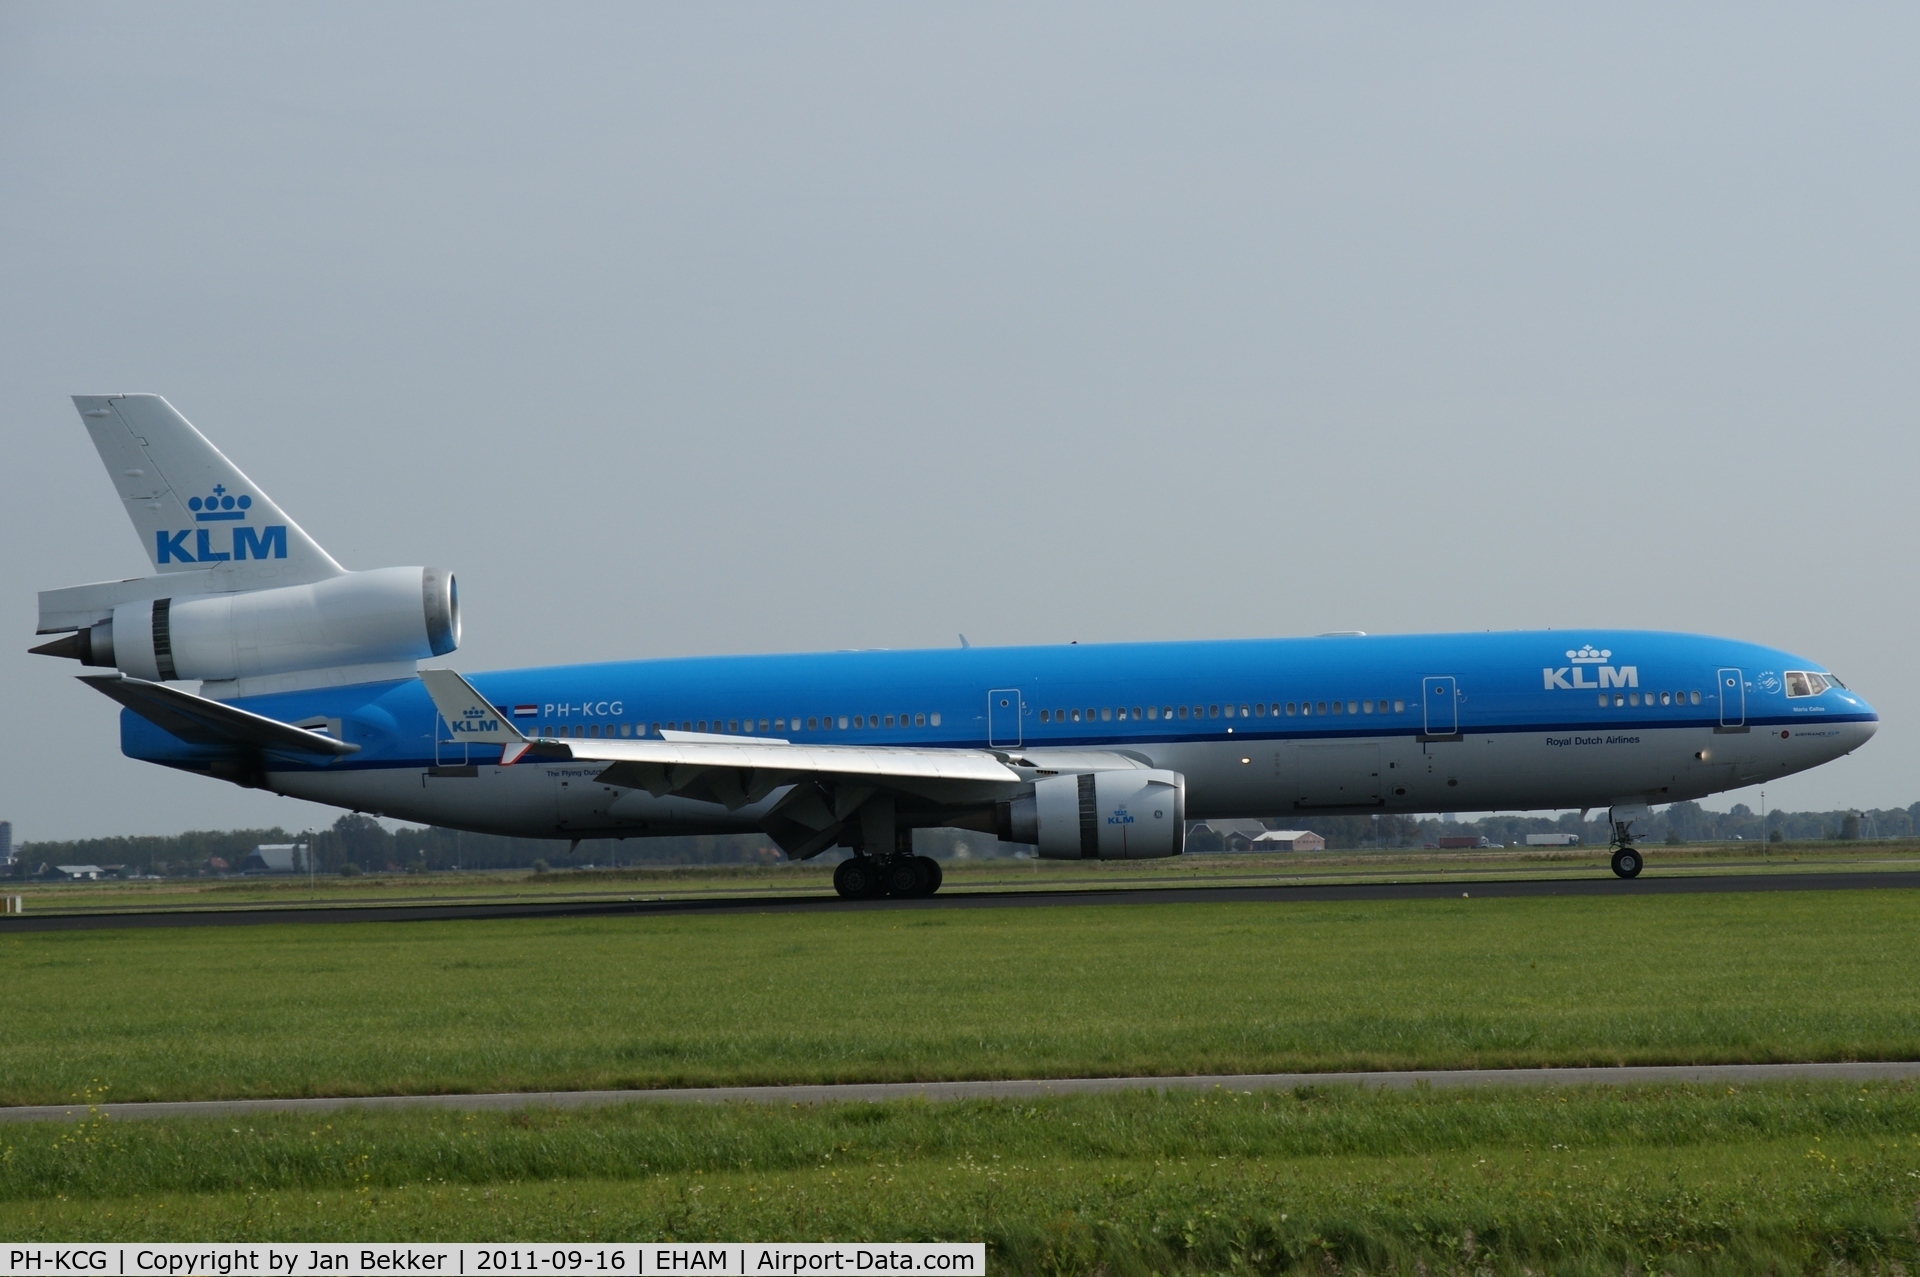 PH-KCG, 1995 McDonnell Douglas MD-11 C/N 48561, Just after landing on the Polderbaan at Schiphol